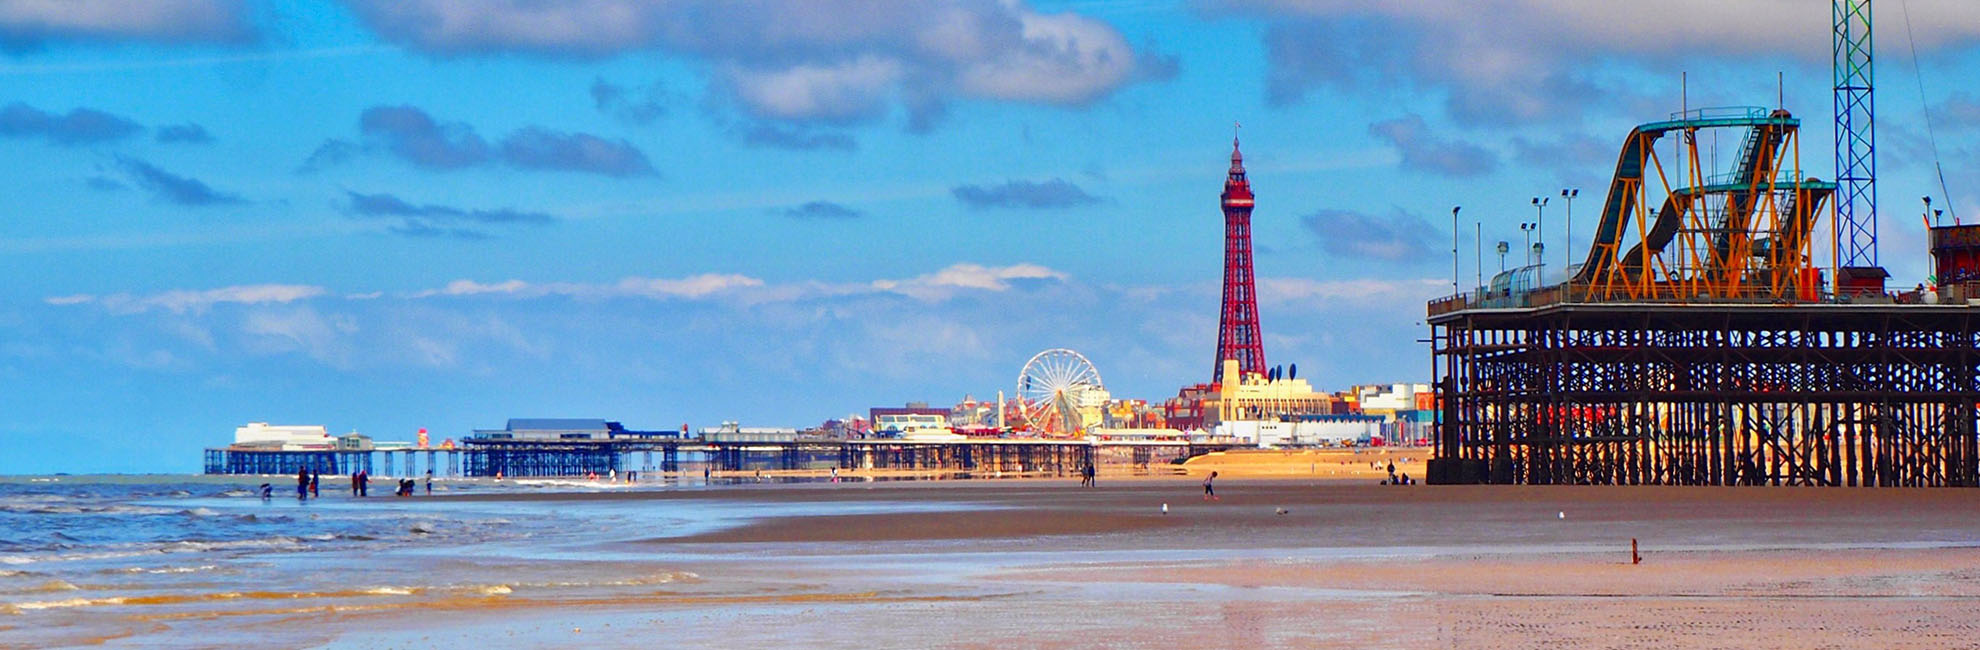 A view across the beach of Blackpool Tower and the Pleasure Beach